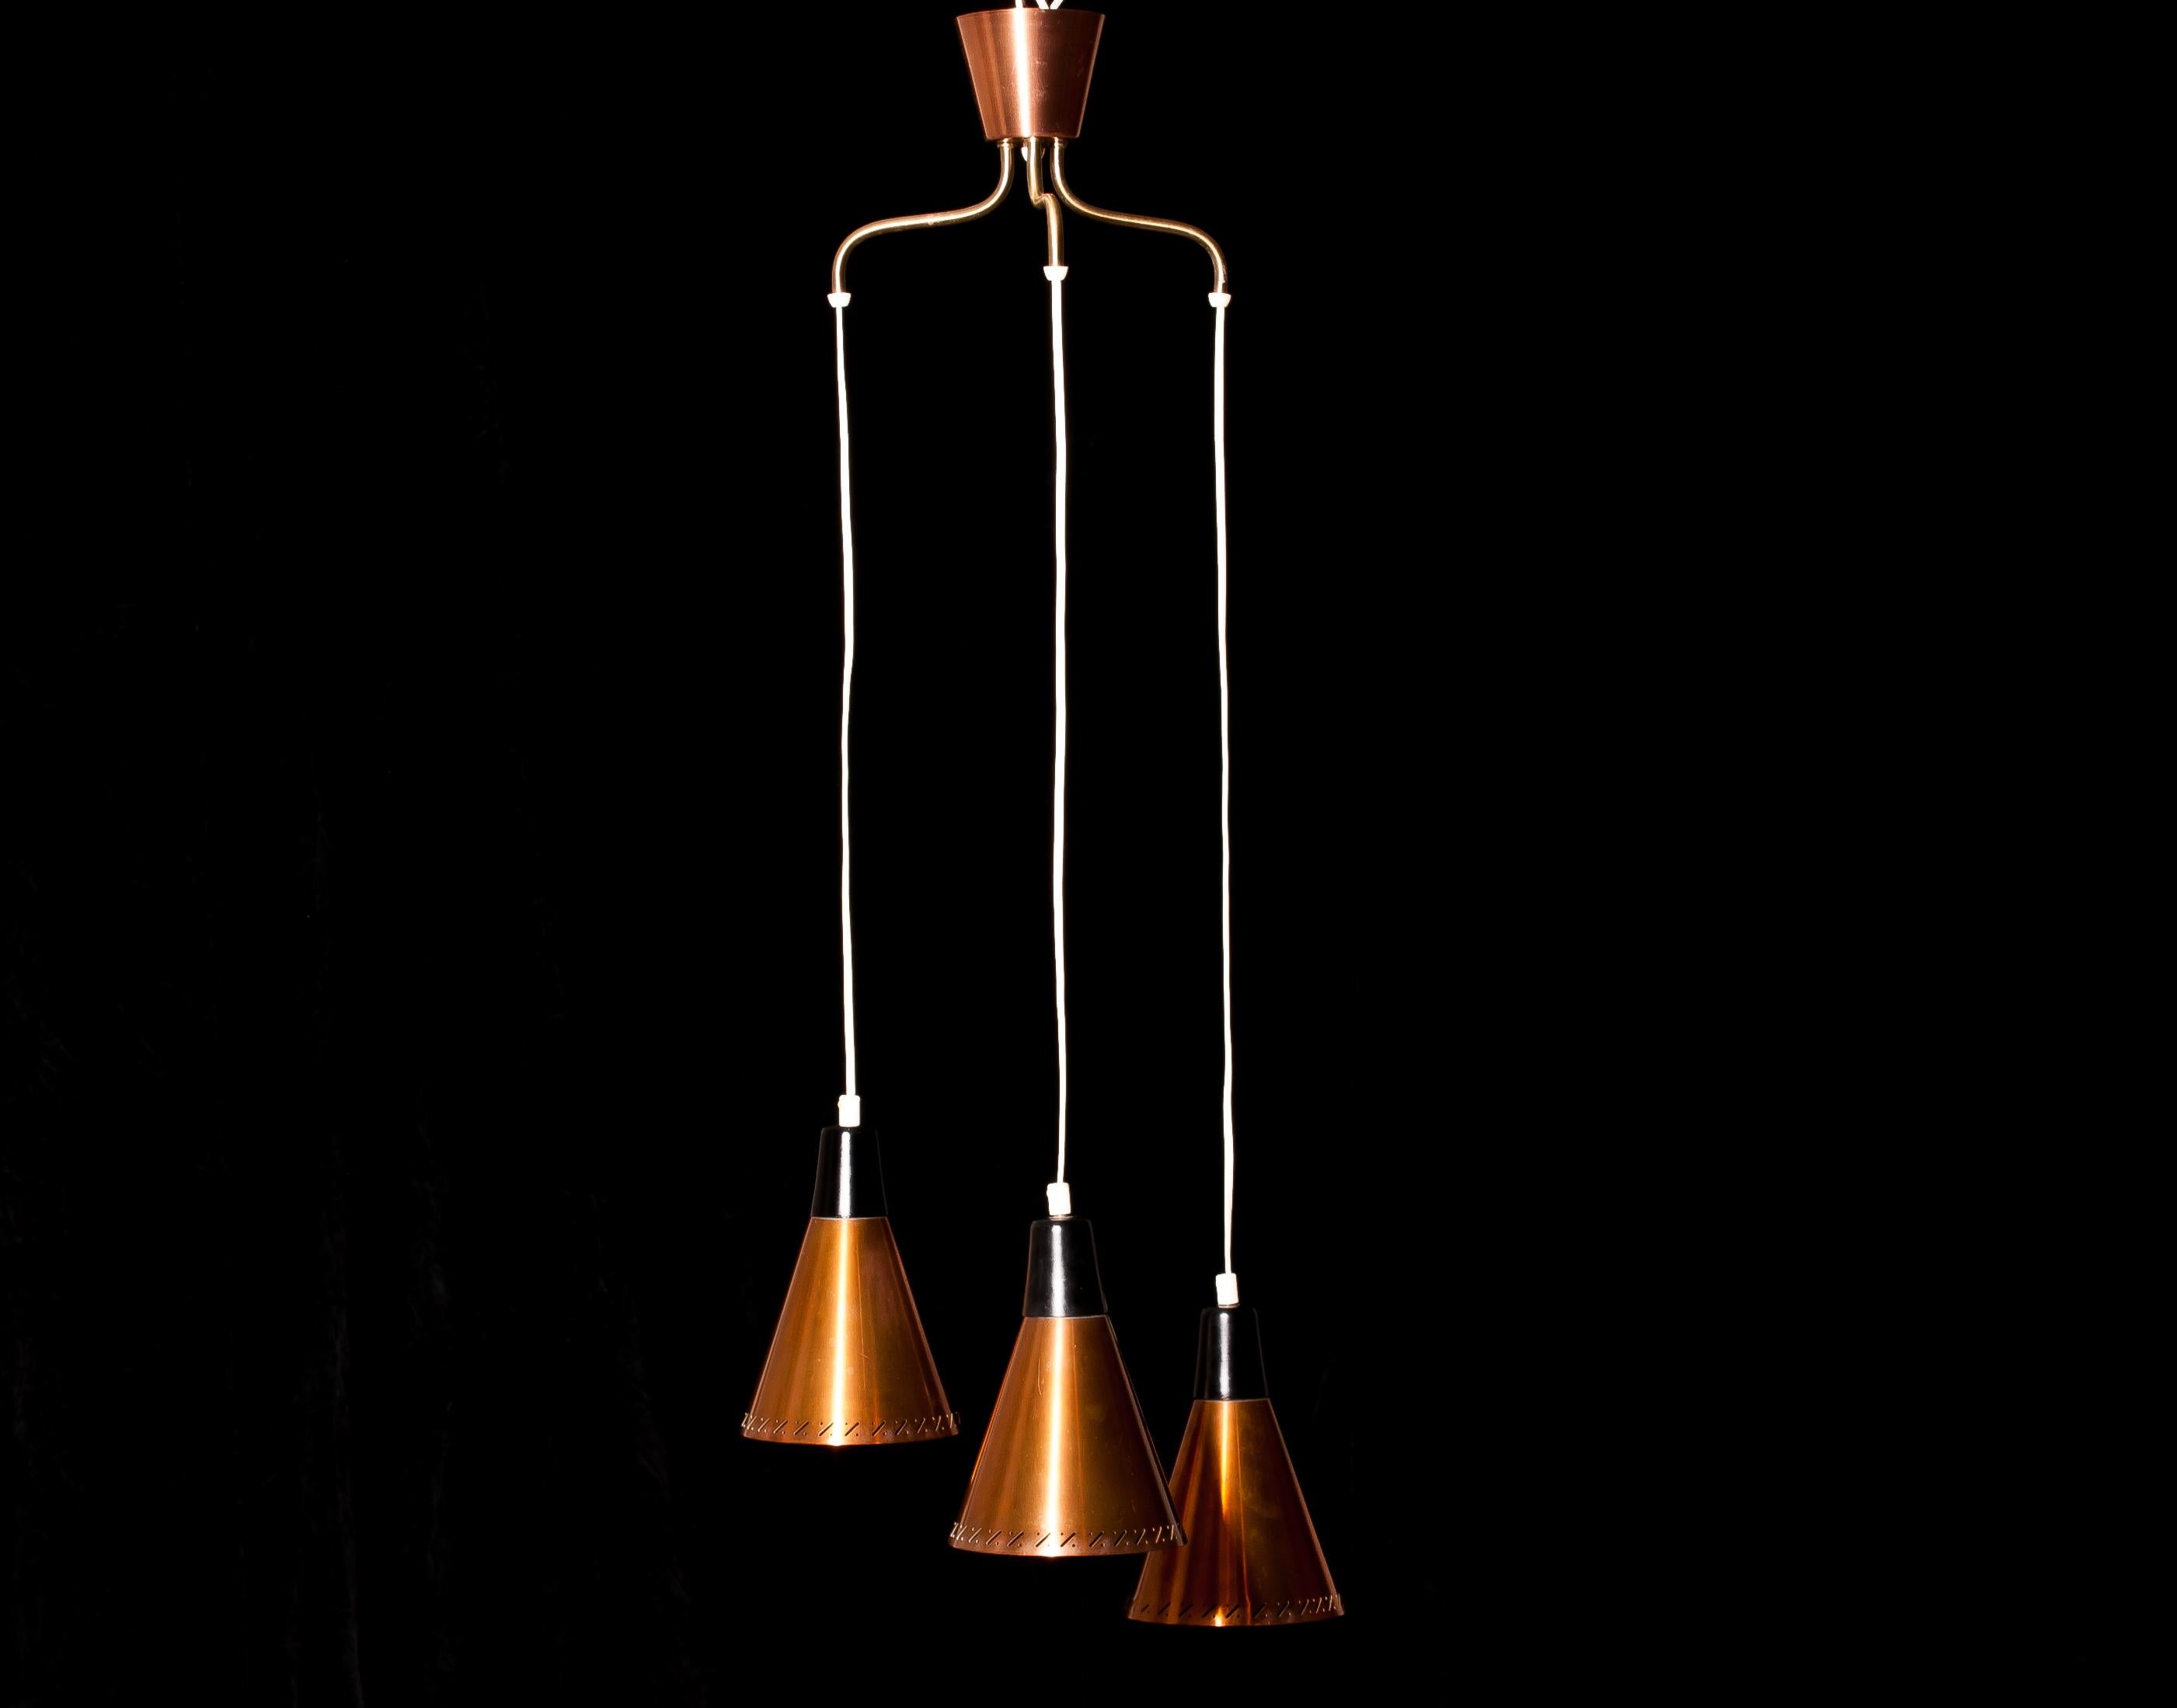 Beautiful lamp designed by Hans-Agne Jakobsson, Sweden.
This pendant is made of three perforated copper shades with brass details.
It is adjustable in height.
The lamp is in a very nice condition.
Period 1950s.
Dimensions: H 117 cm, ø 45.